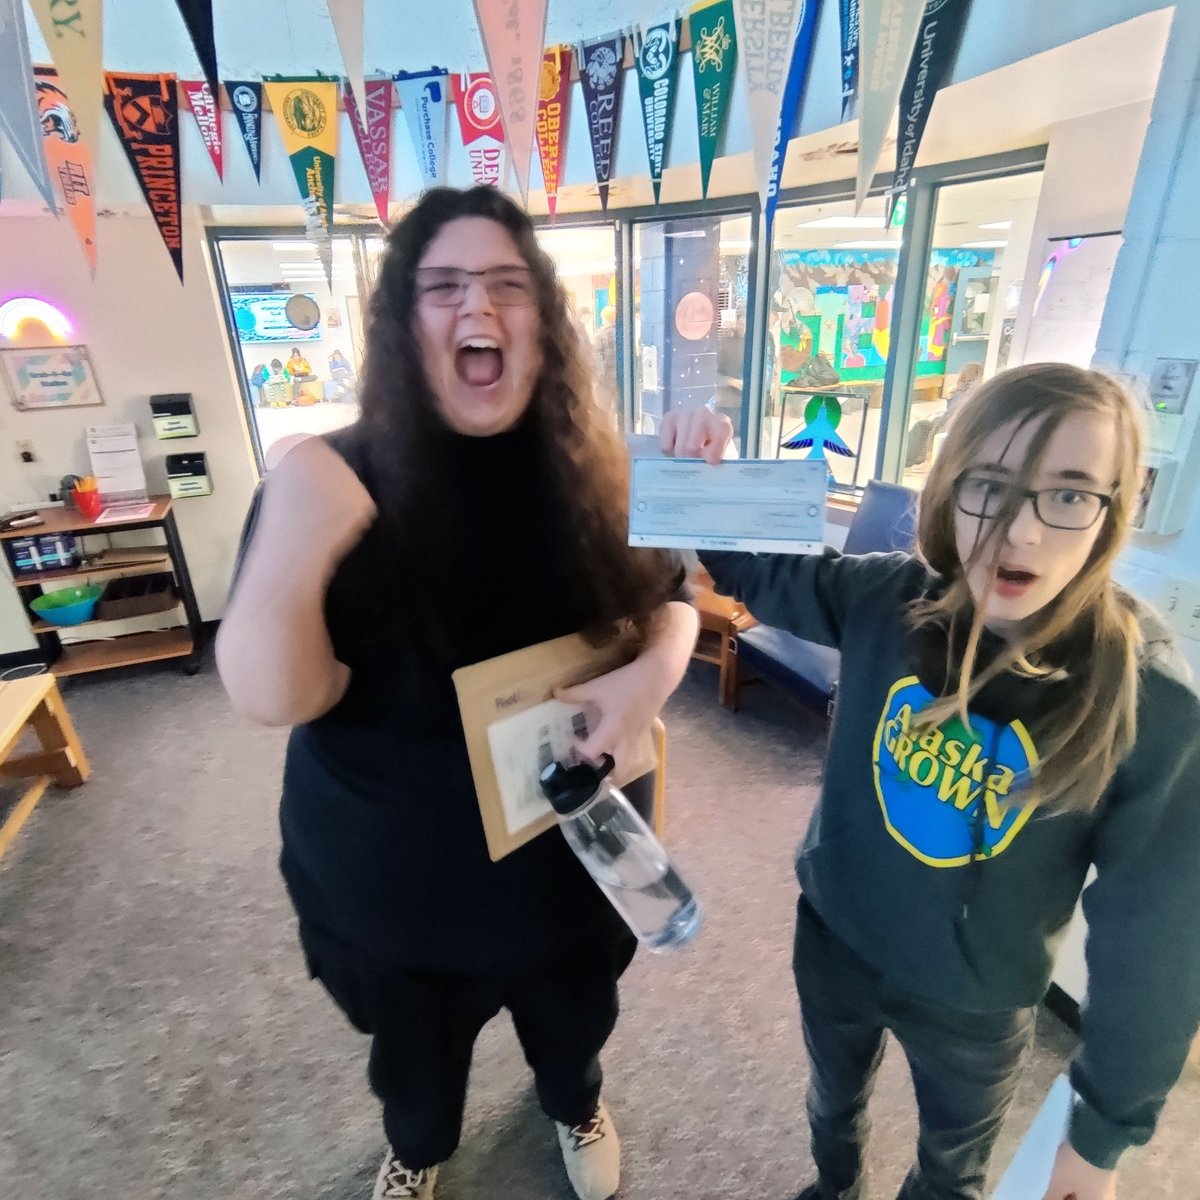 Congrats to Mr. Brian Gehring at Steller Secondary School in Anchorage, AK for receiving a $3,899 grant from our Foundation for their Peer Taught Computing project! 🙌 We can see their excitement from the picture😊The next deadline on 3/1 at toshiba.com/taf